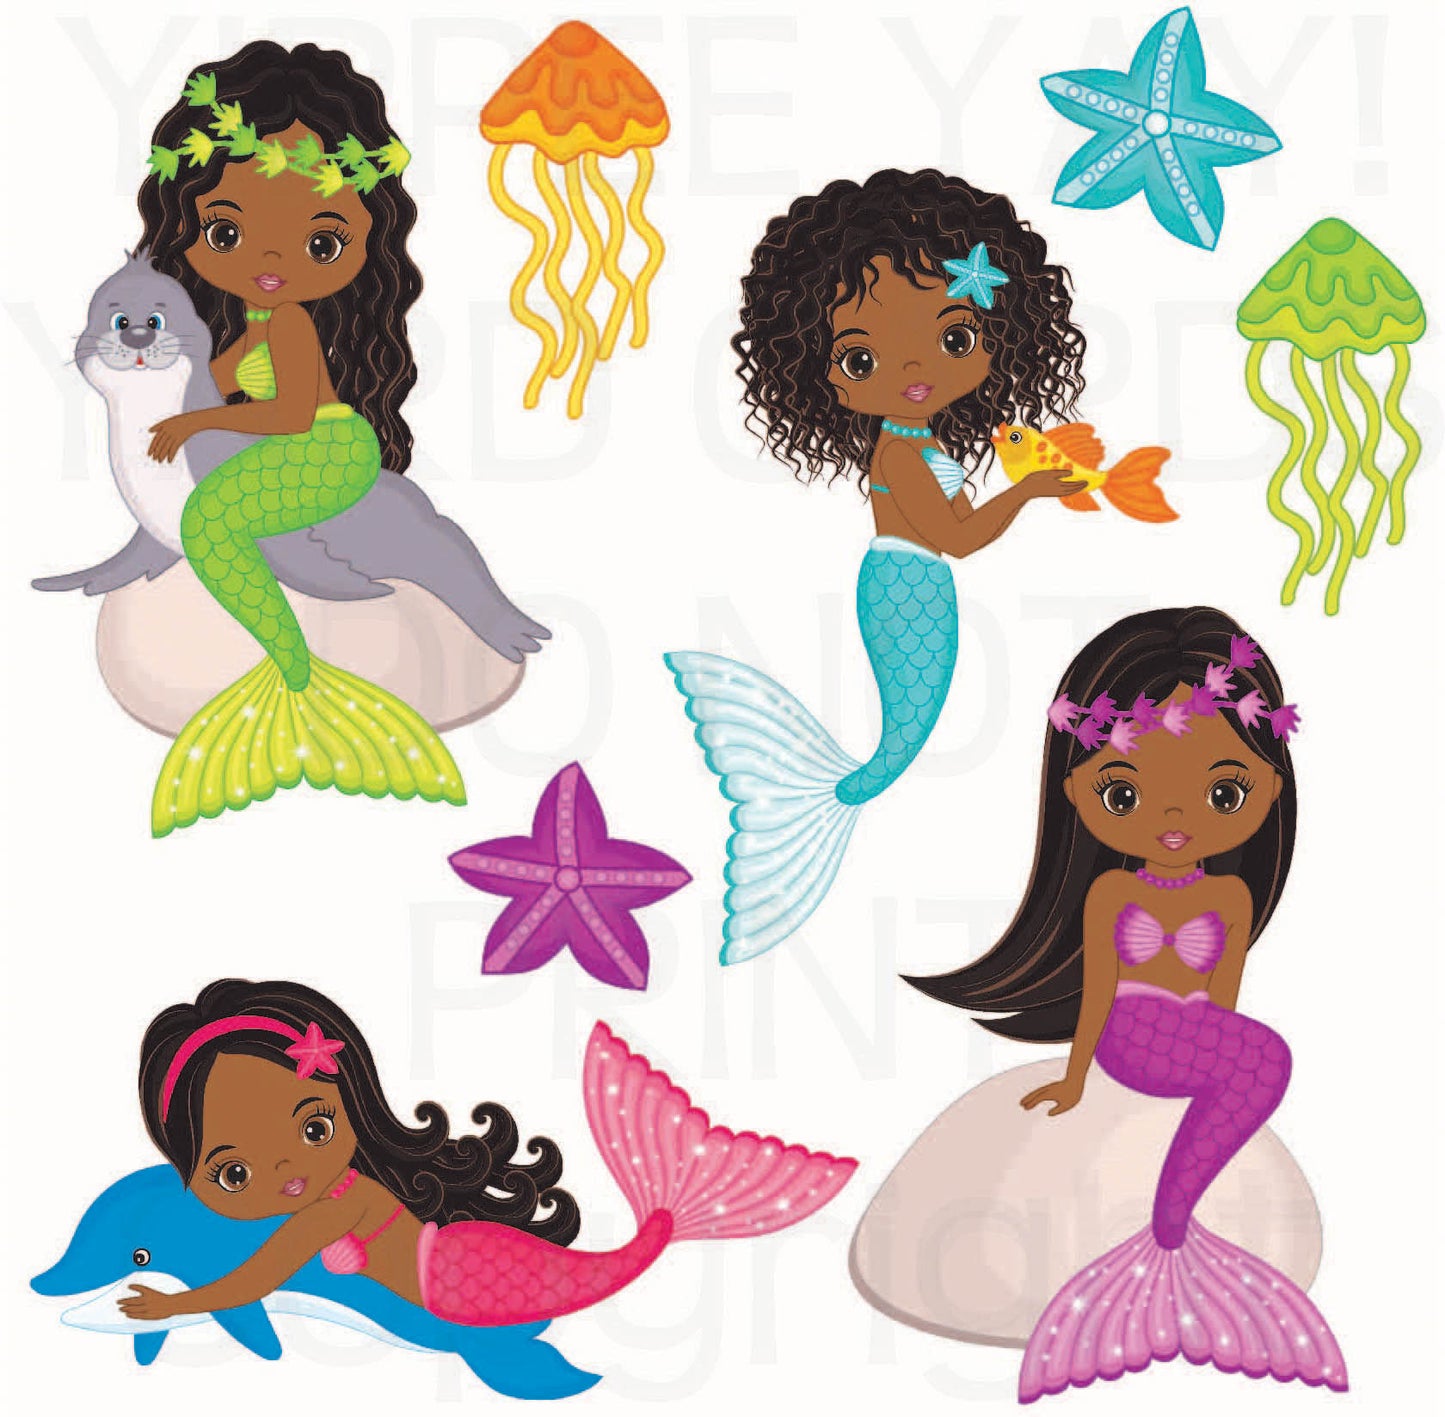 Mermaids 1 Half Sheet Misc. (Must Purchase 2 Half sheets - You Can Mix & Match)